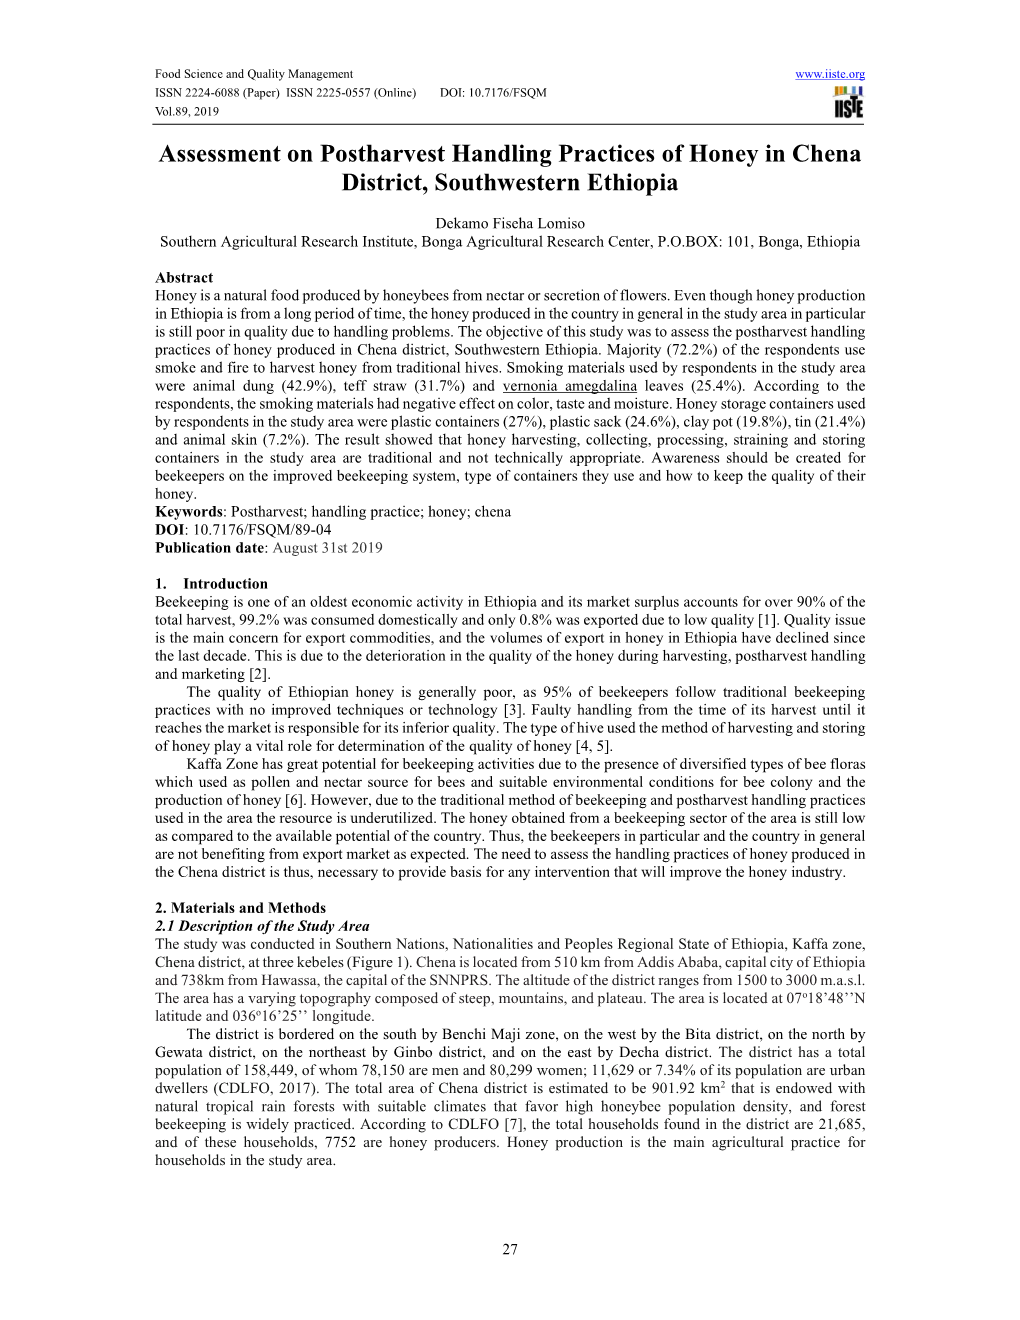 Assessment on Postharvest Handling Practices of Honey in Chena District, Southwestern Ethiopia